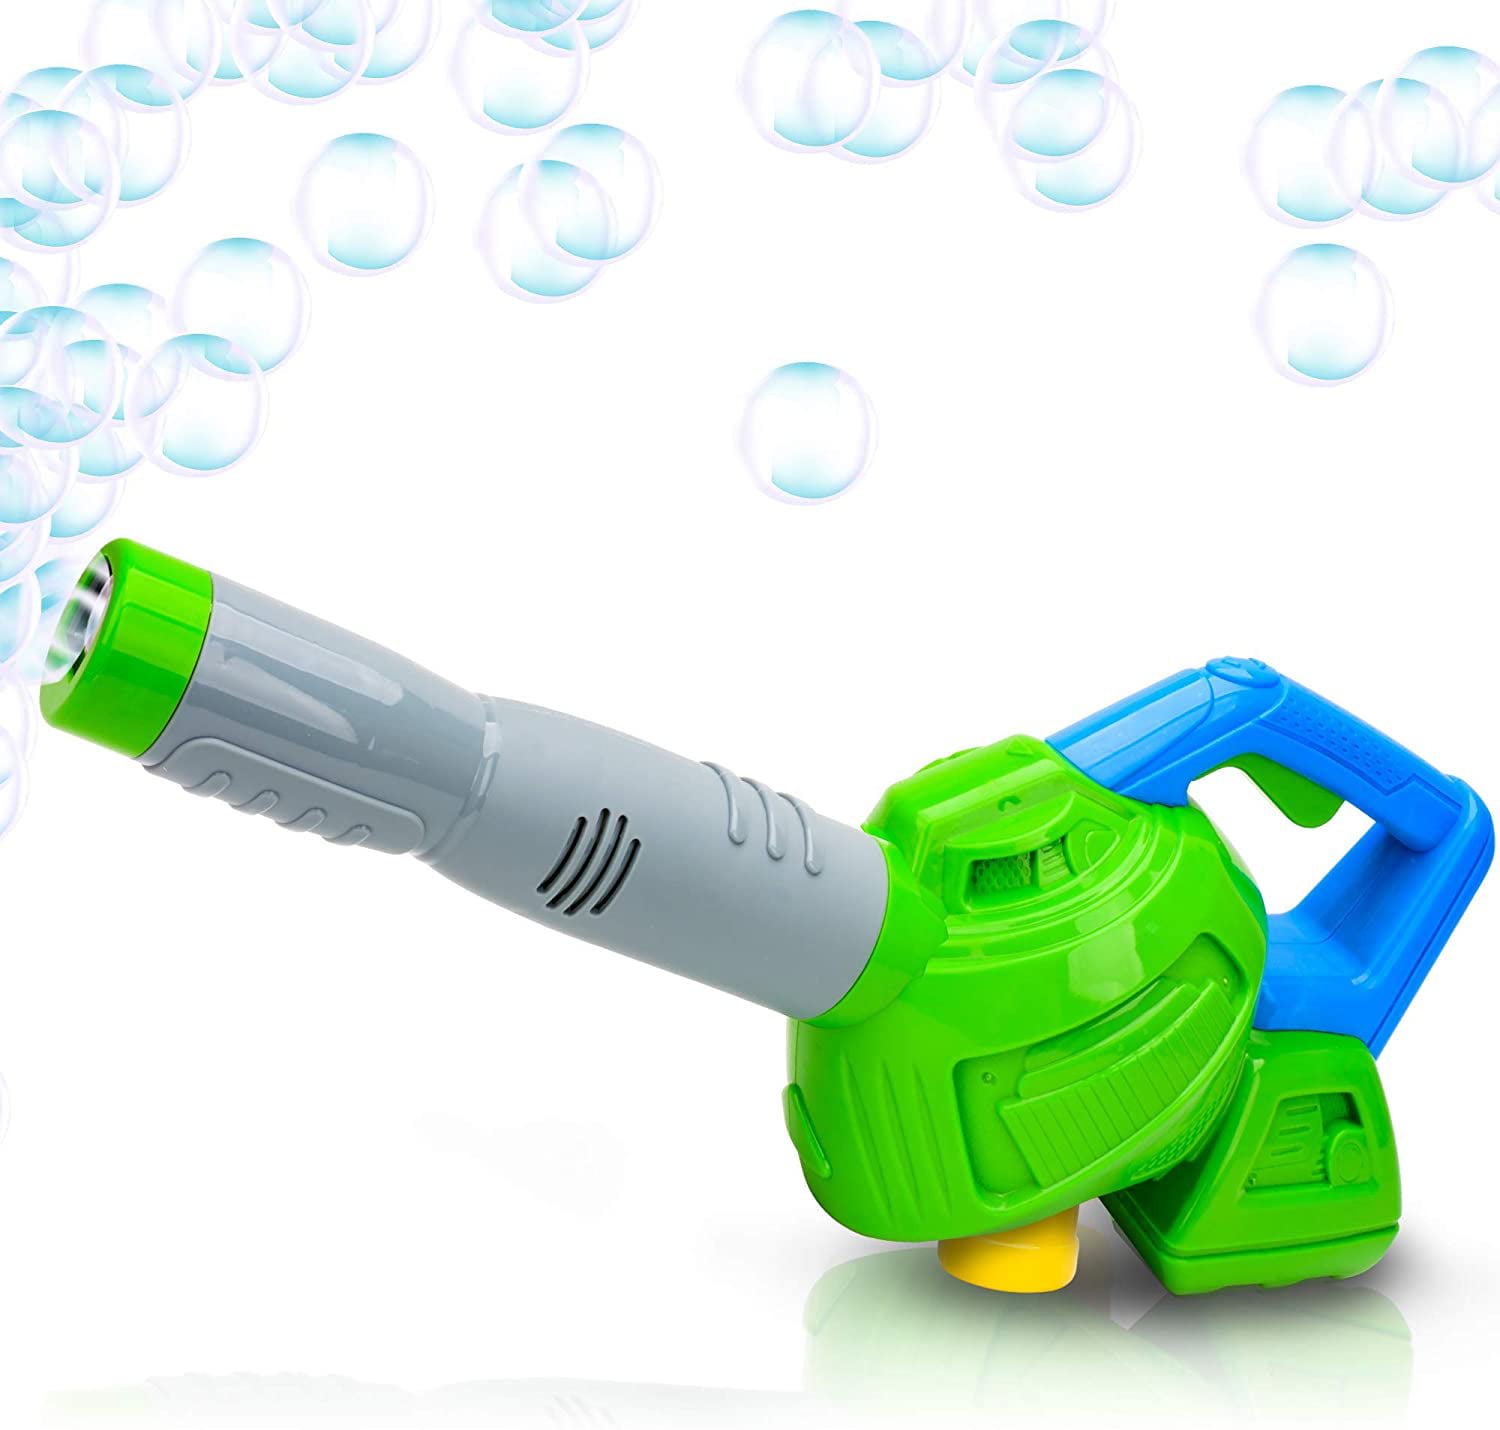 Bubble Solution for Bubble Blower Machine/Gun Ideal Birthday Gift for Kids 